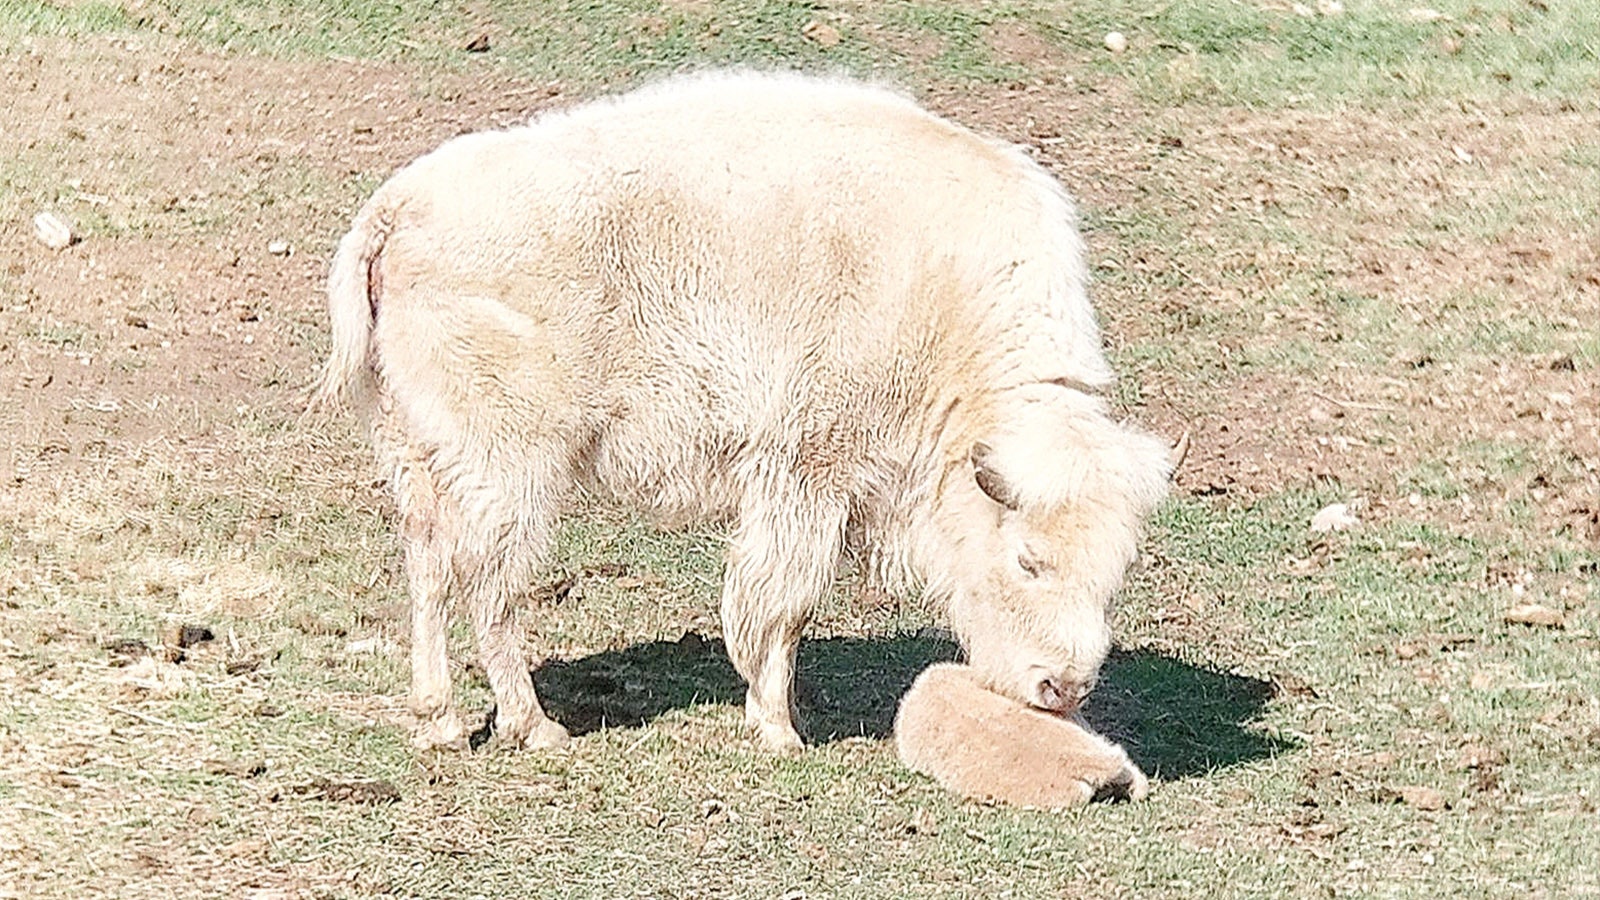 A white bison named Wyoming Hope gave birth Tuesday morning to a white bison calf at Bear River State Park.